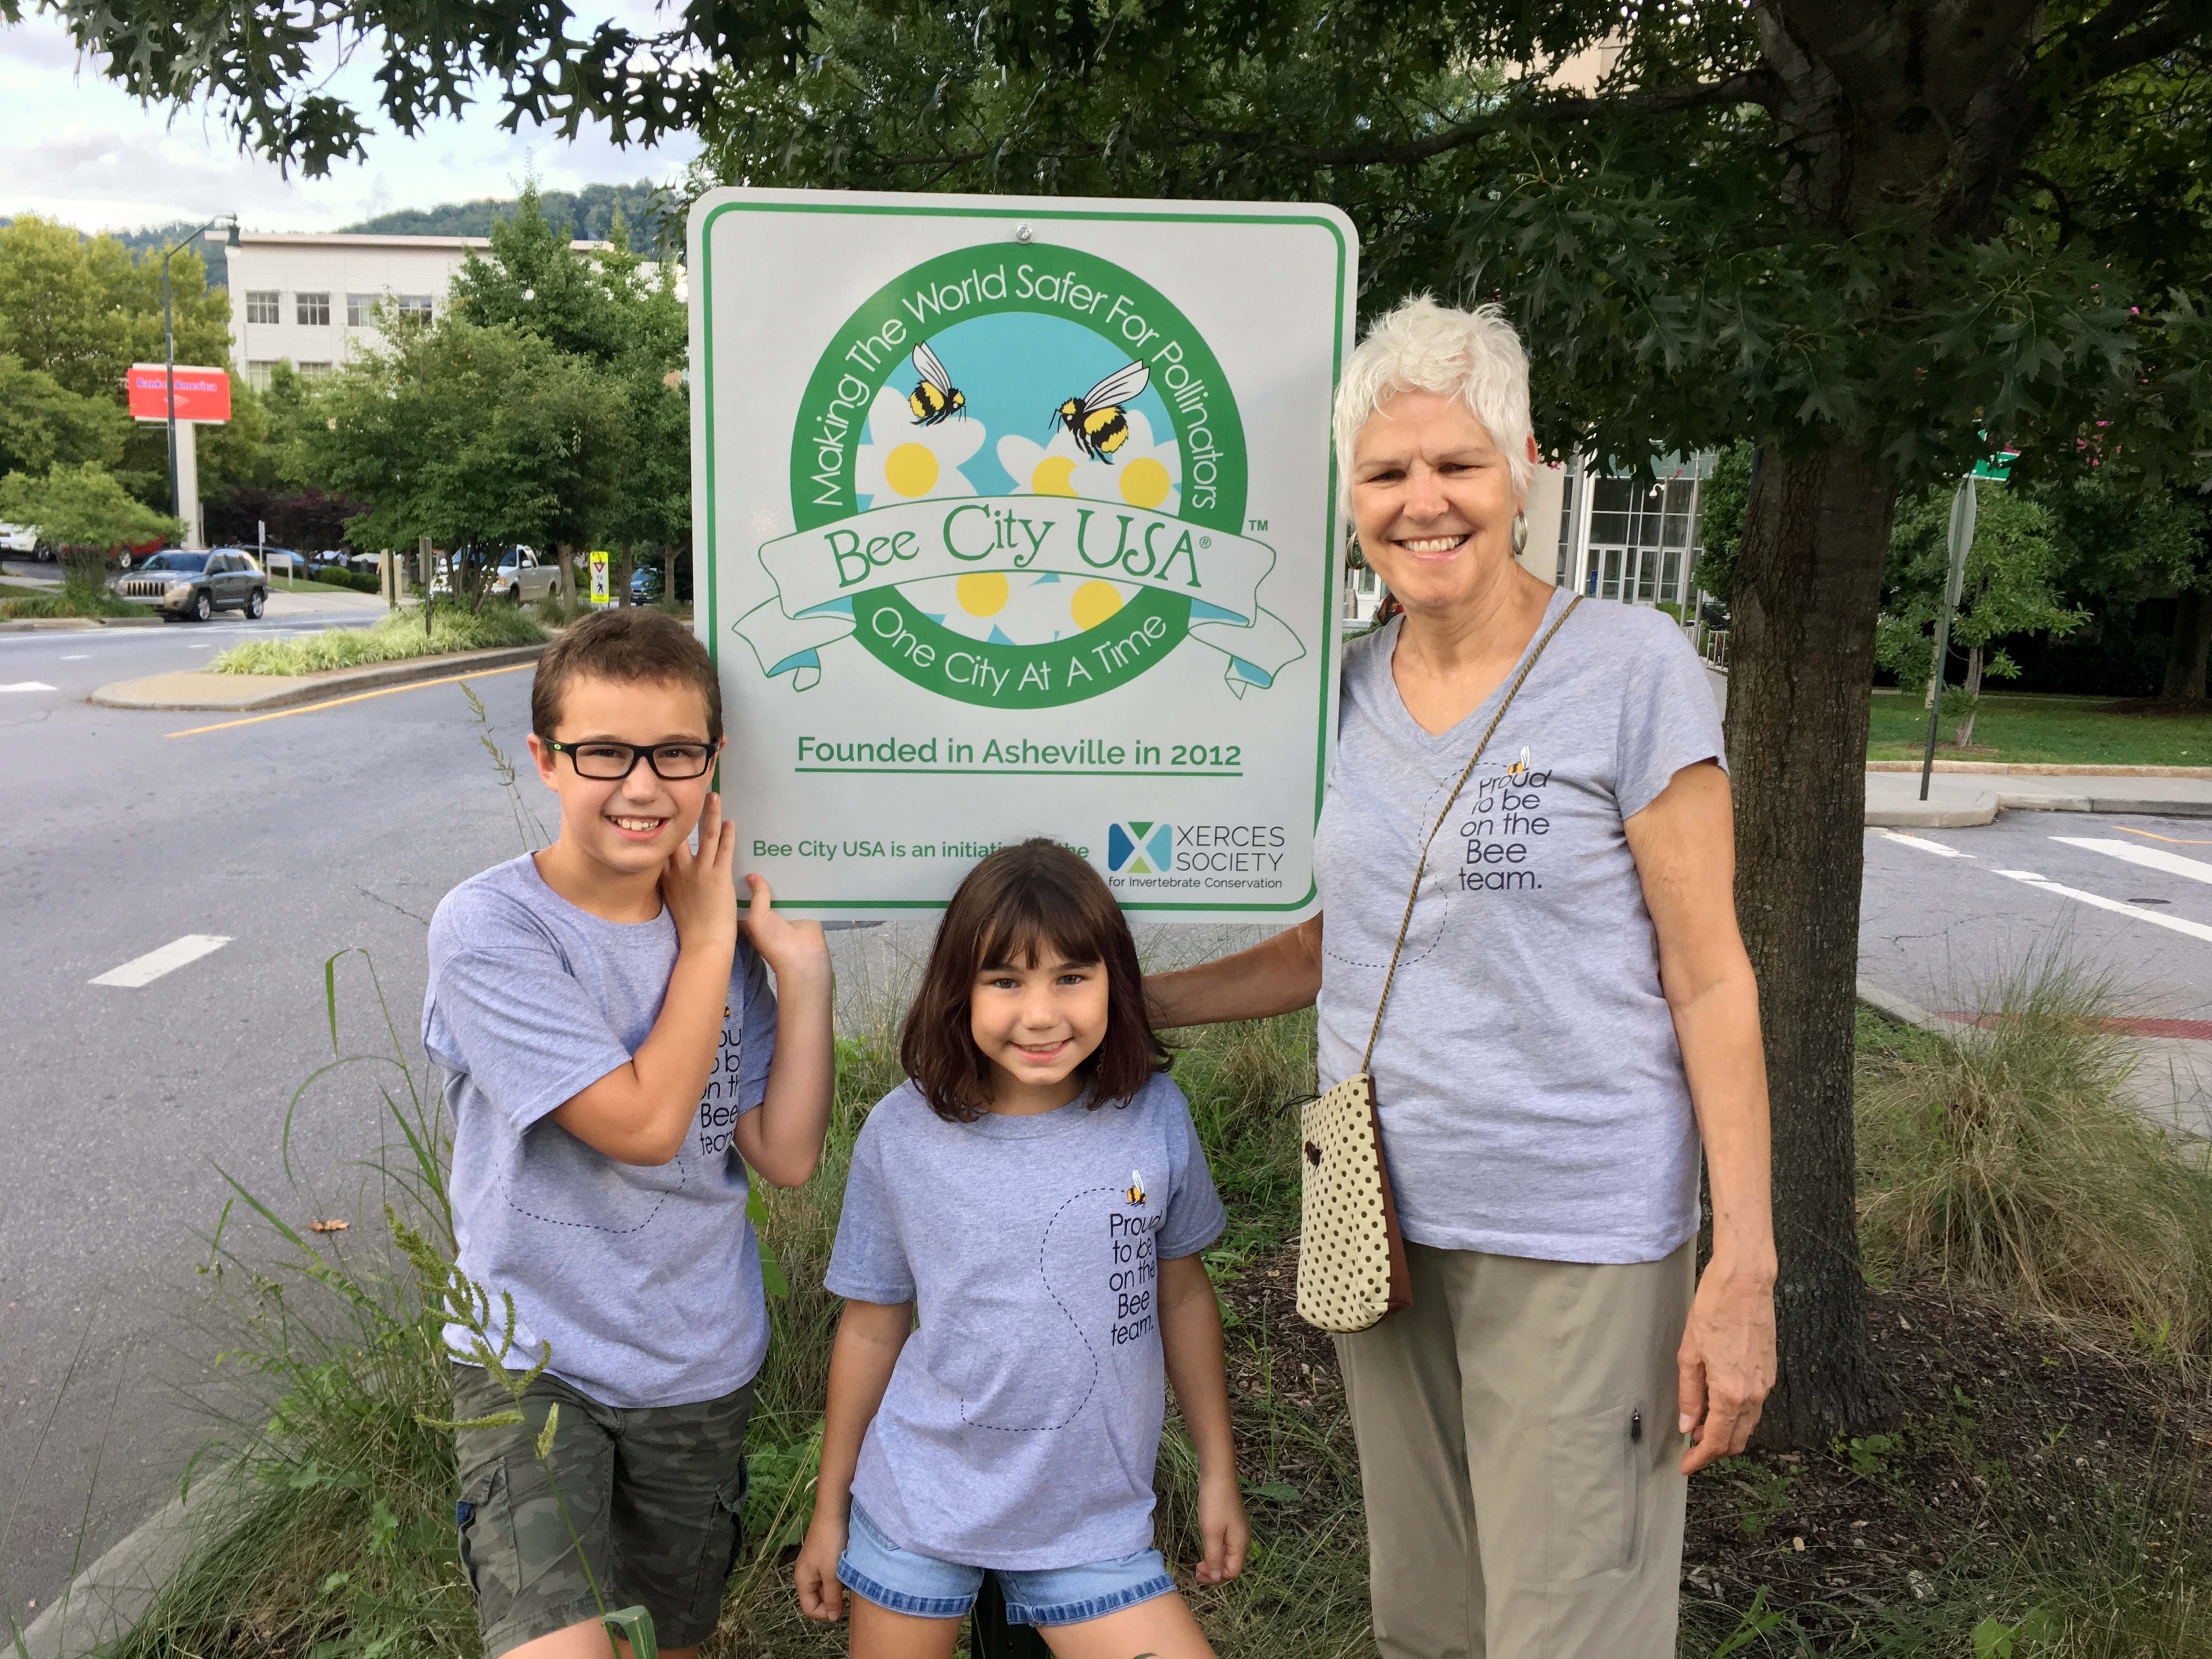 A tall woman with short, white hair poses with two children by a sign with the Bee City USA logo, that reads "founded in Asheville in 2012."